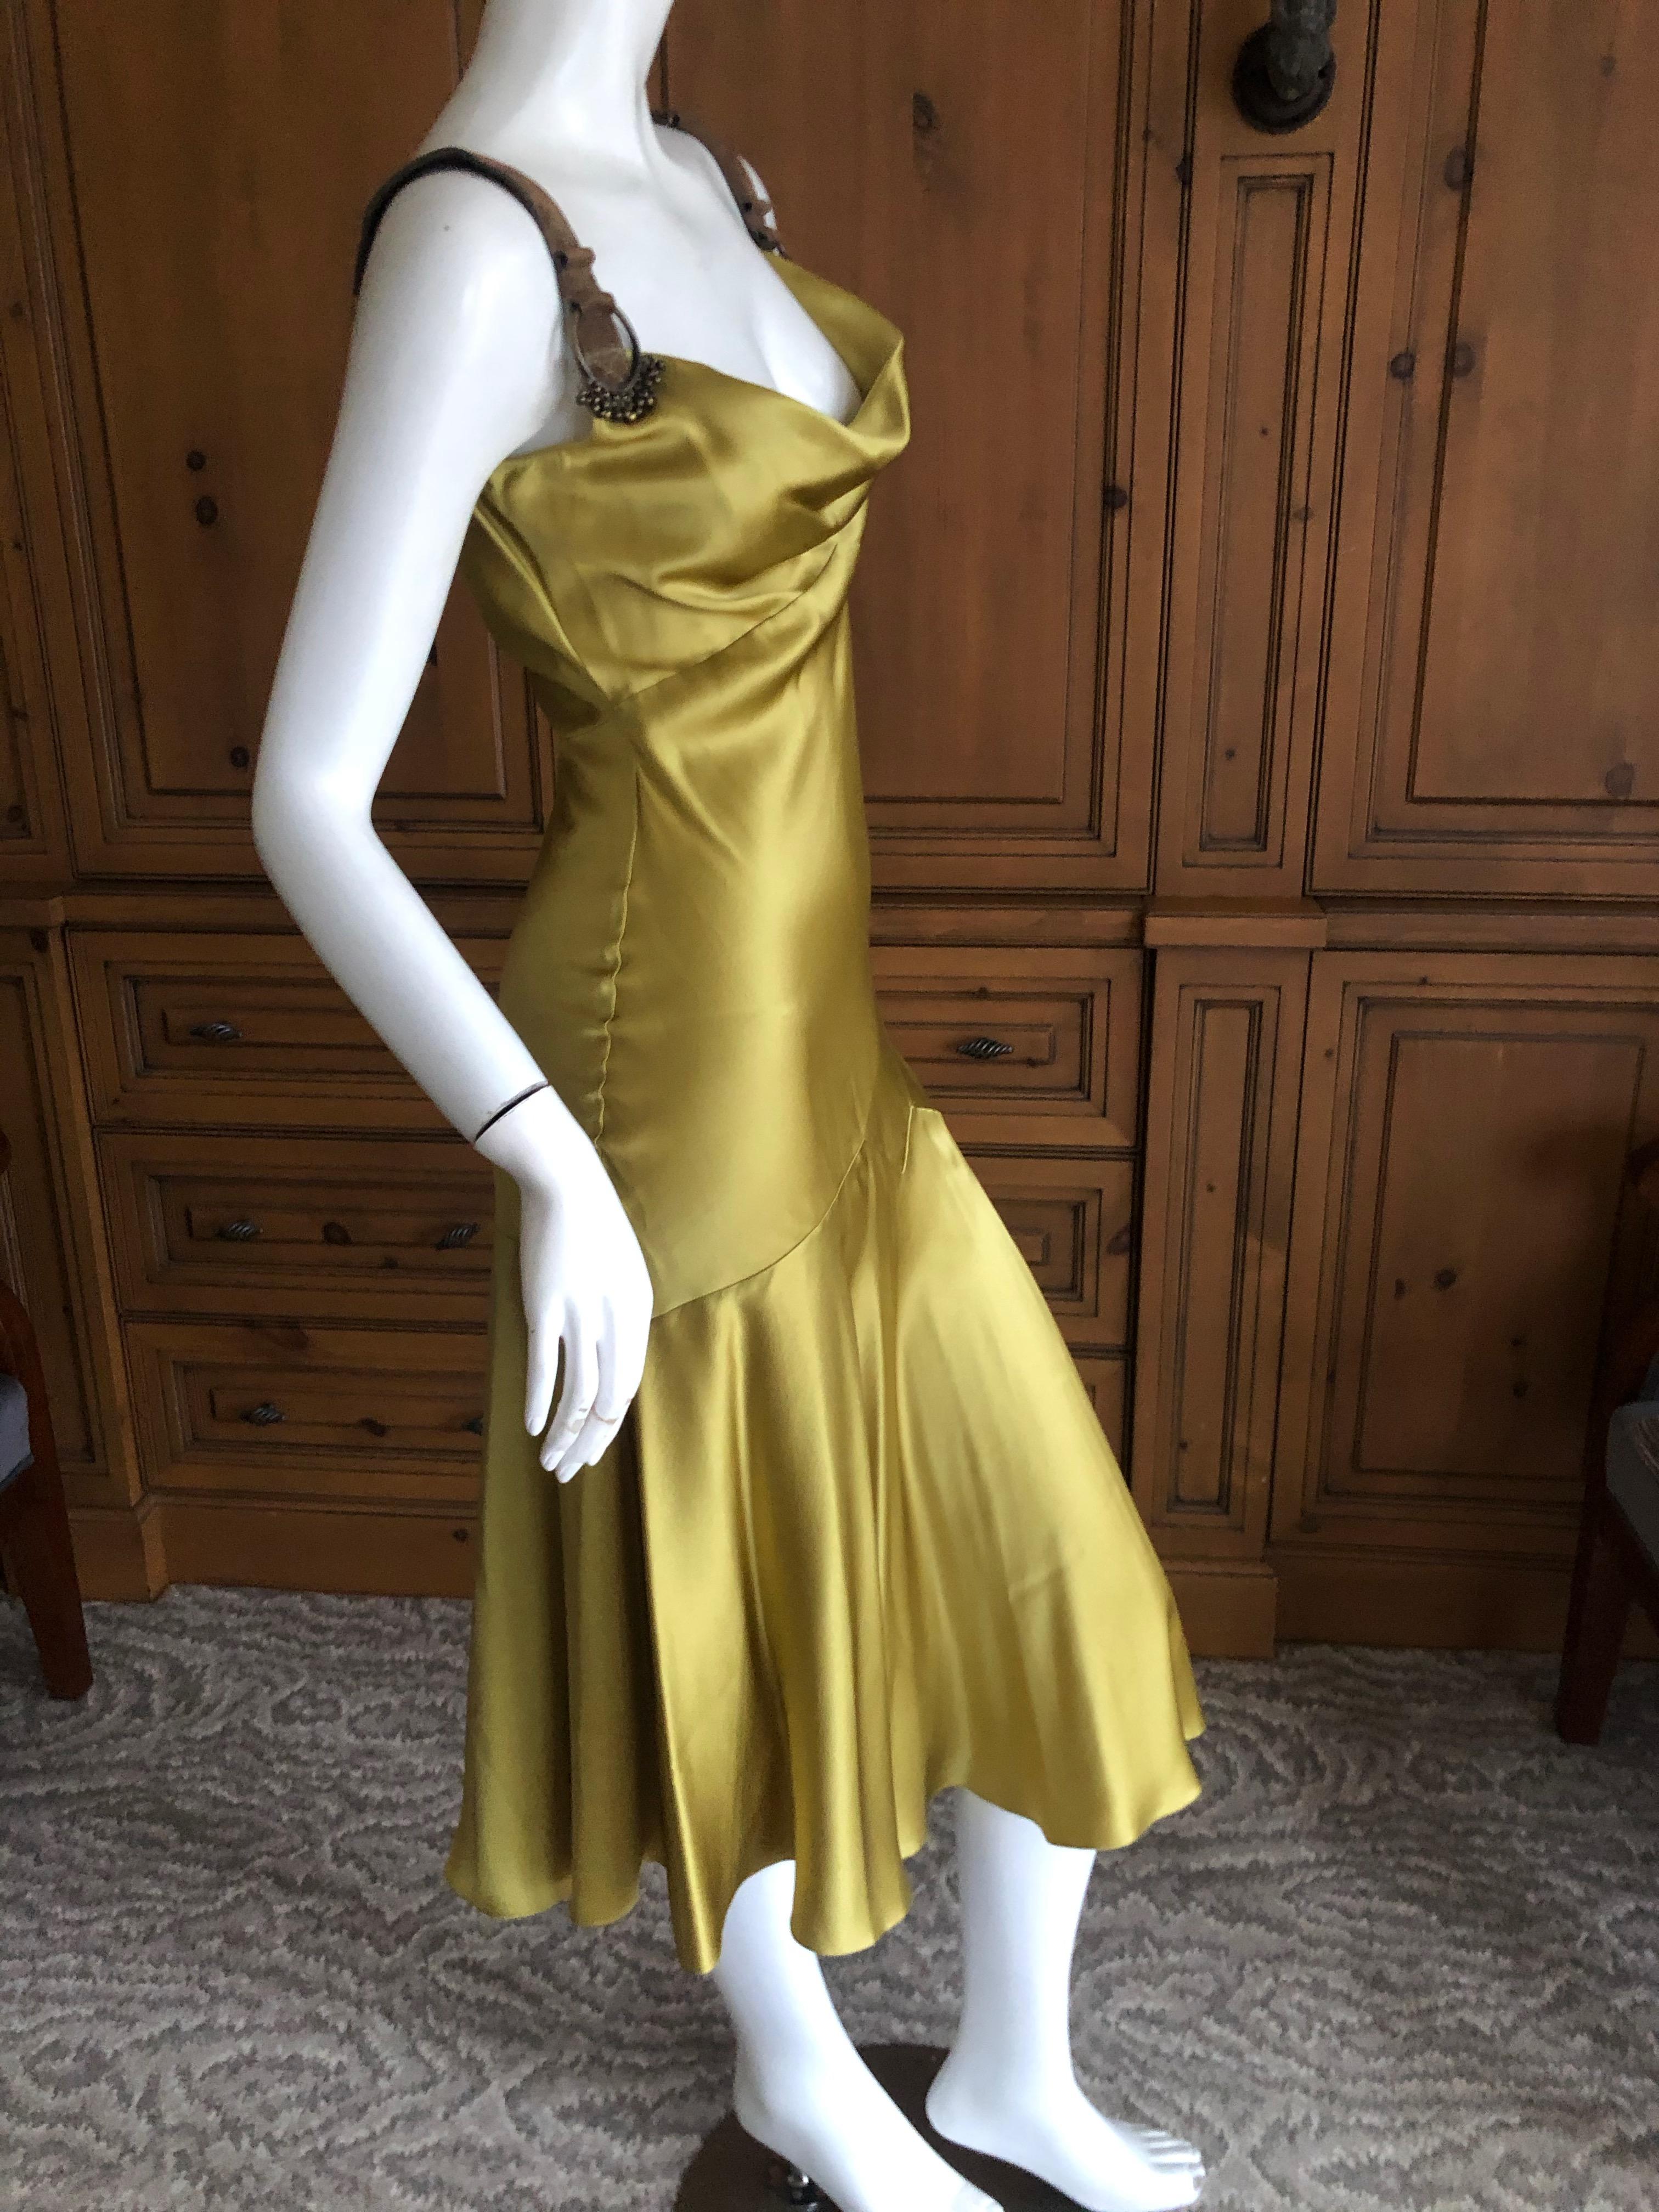 Women's John Galliano Chartreuse Silk Charmeuse Cocktail Dress with Leather Straps For Sale